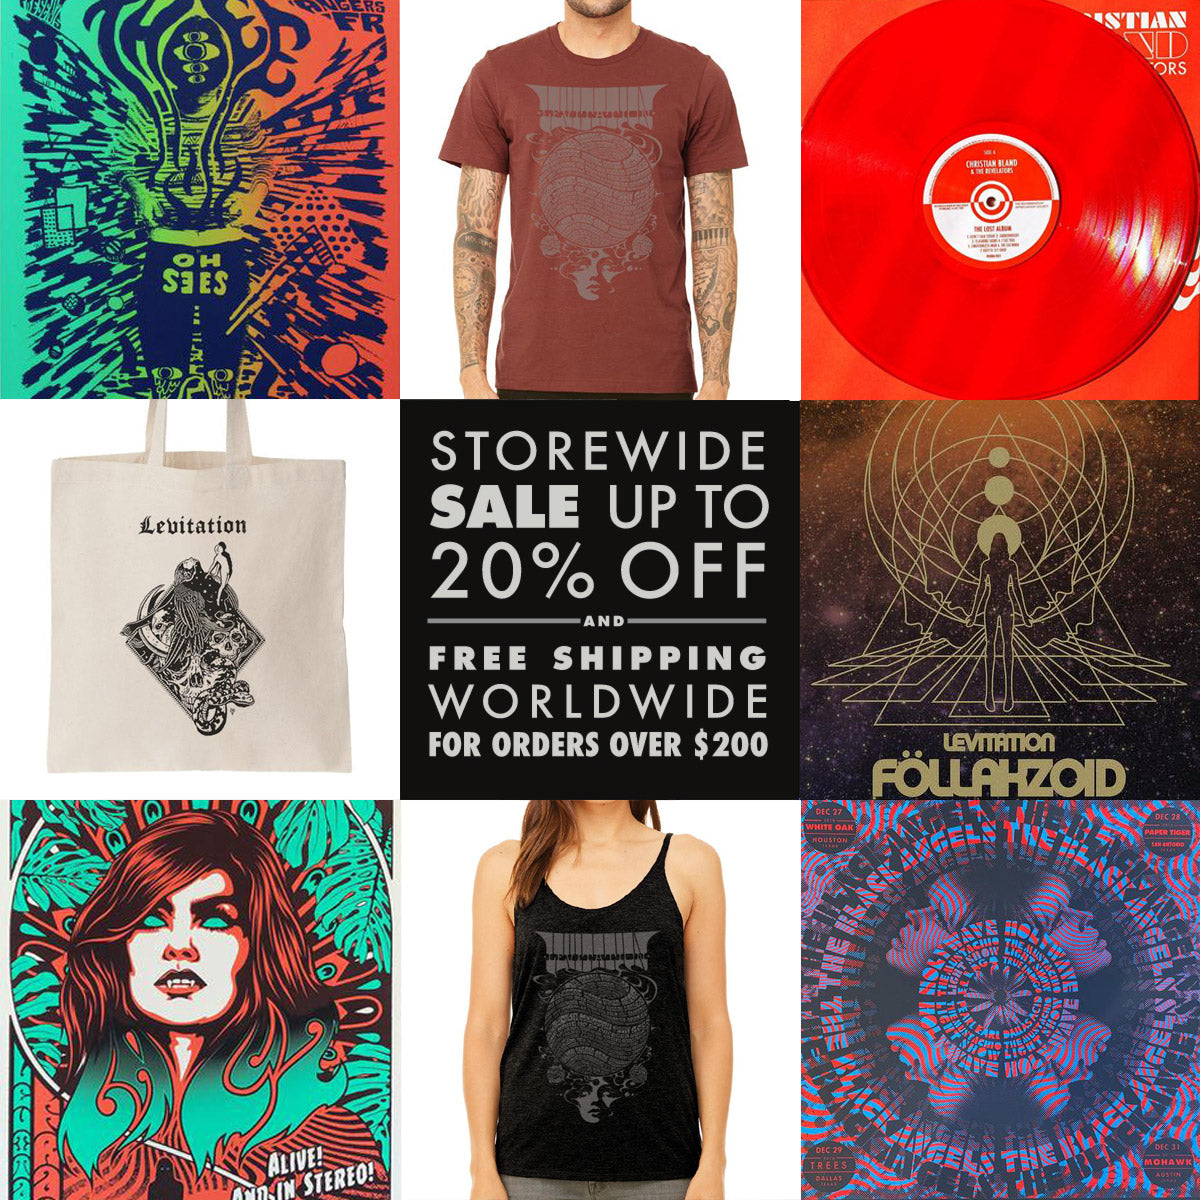 WINTER SALE: 20% OFF SALE + FREE SHIPPING